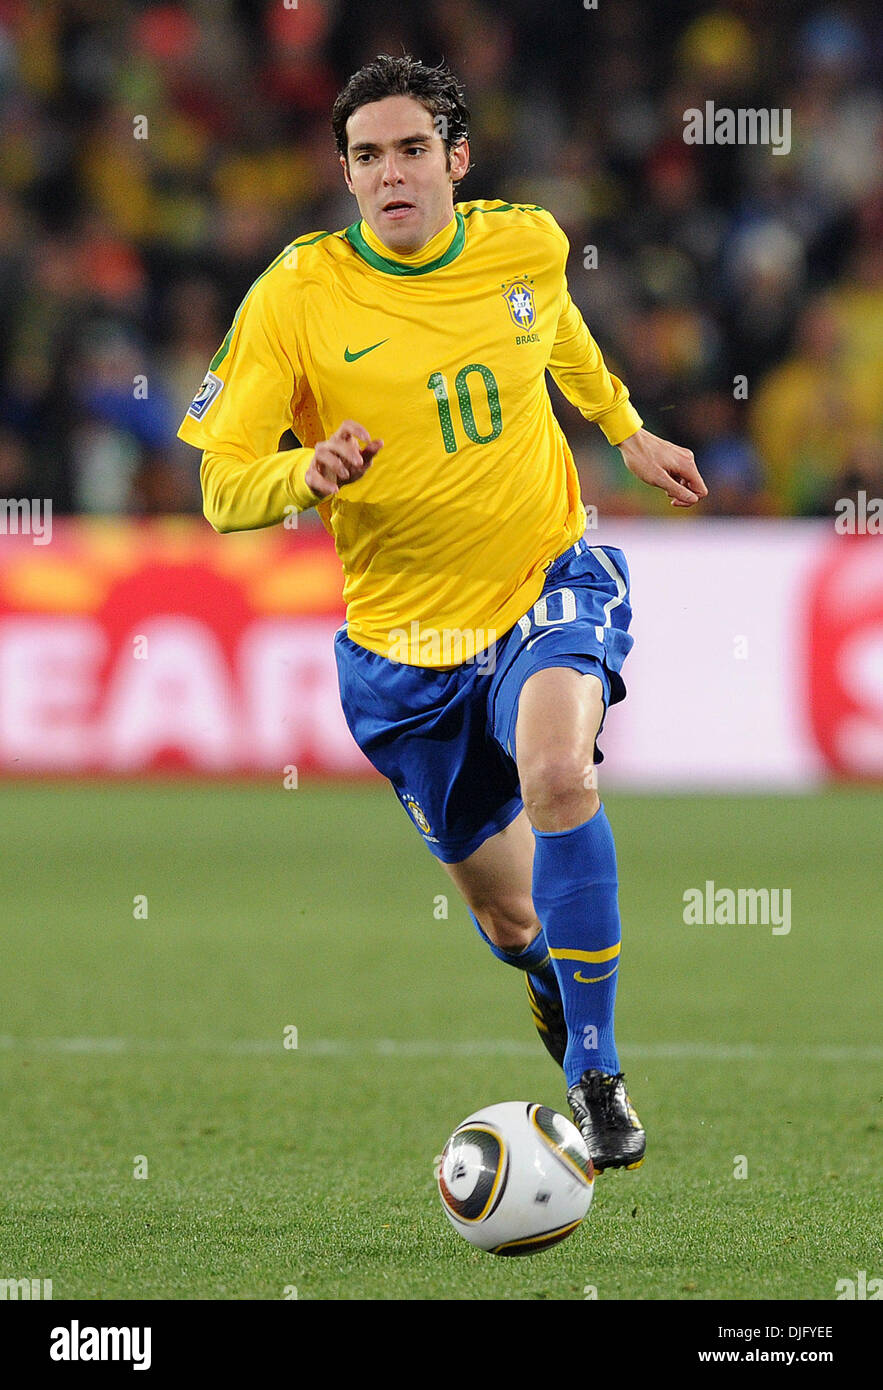 June 28, 2010 - Johannesburg, South Africa - Kaka of Brazil in action during the 2010 FIFA World Cup soccer match between Brazil and Chile at Ellis Park Stadium on June 28, 2010 in Johannesburg, South Africa. (Credit Image: © Luca Ghidoni/ZUMApress.com) Stock Photo